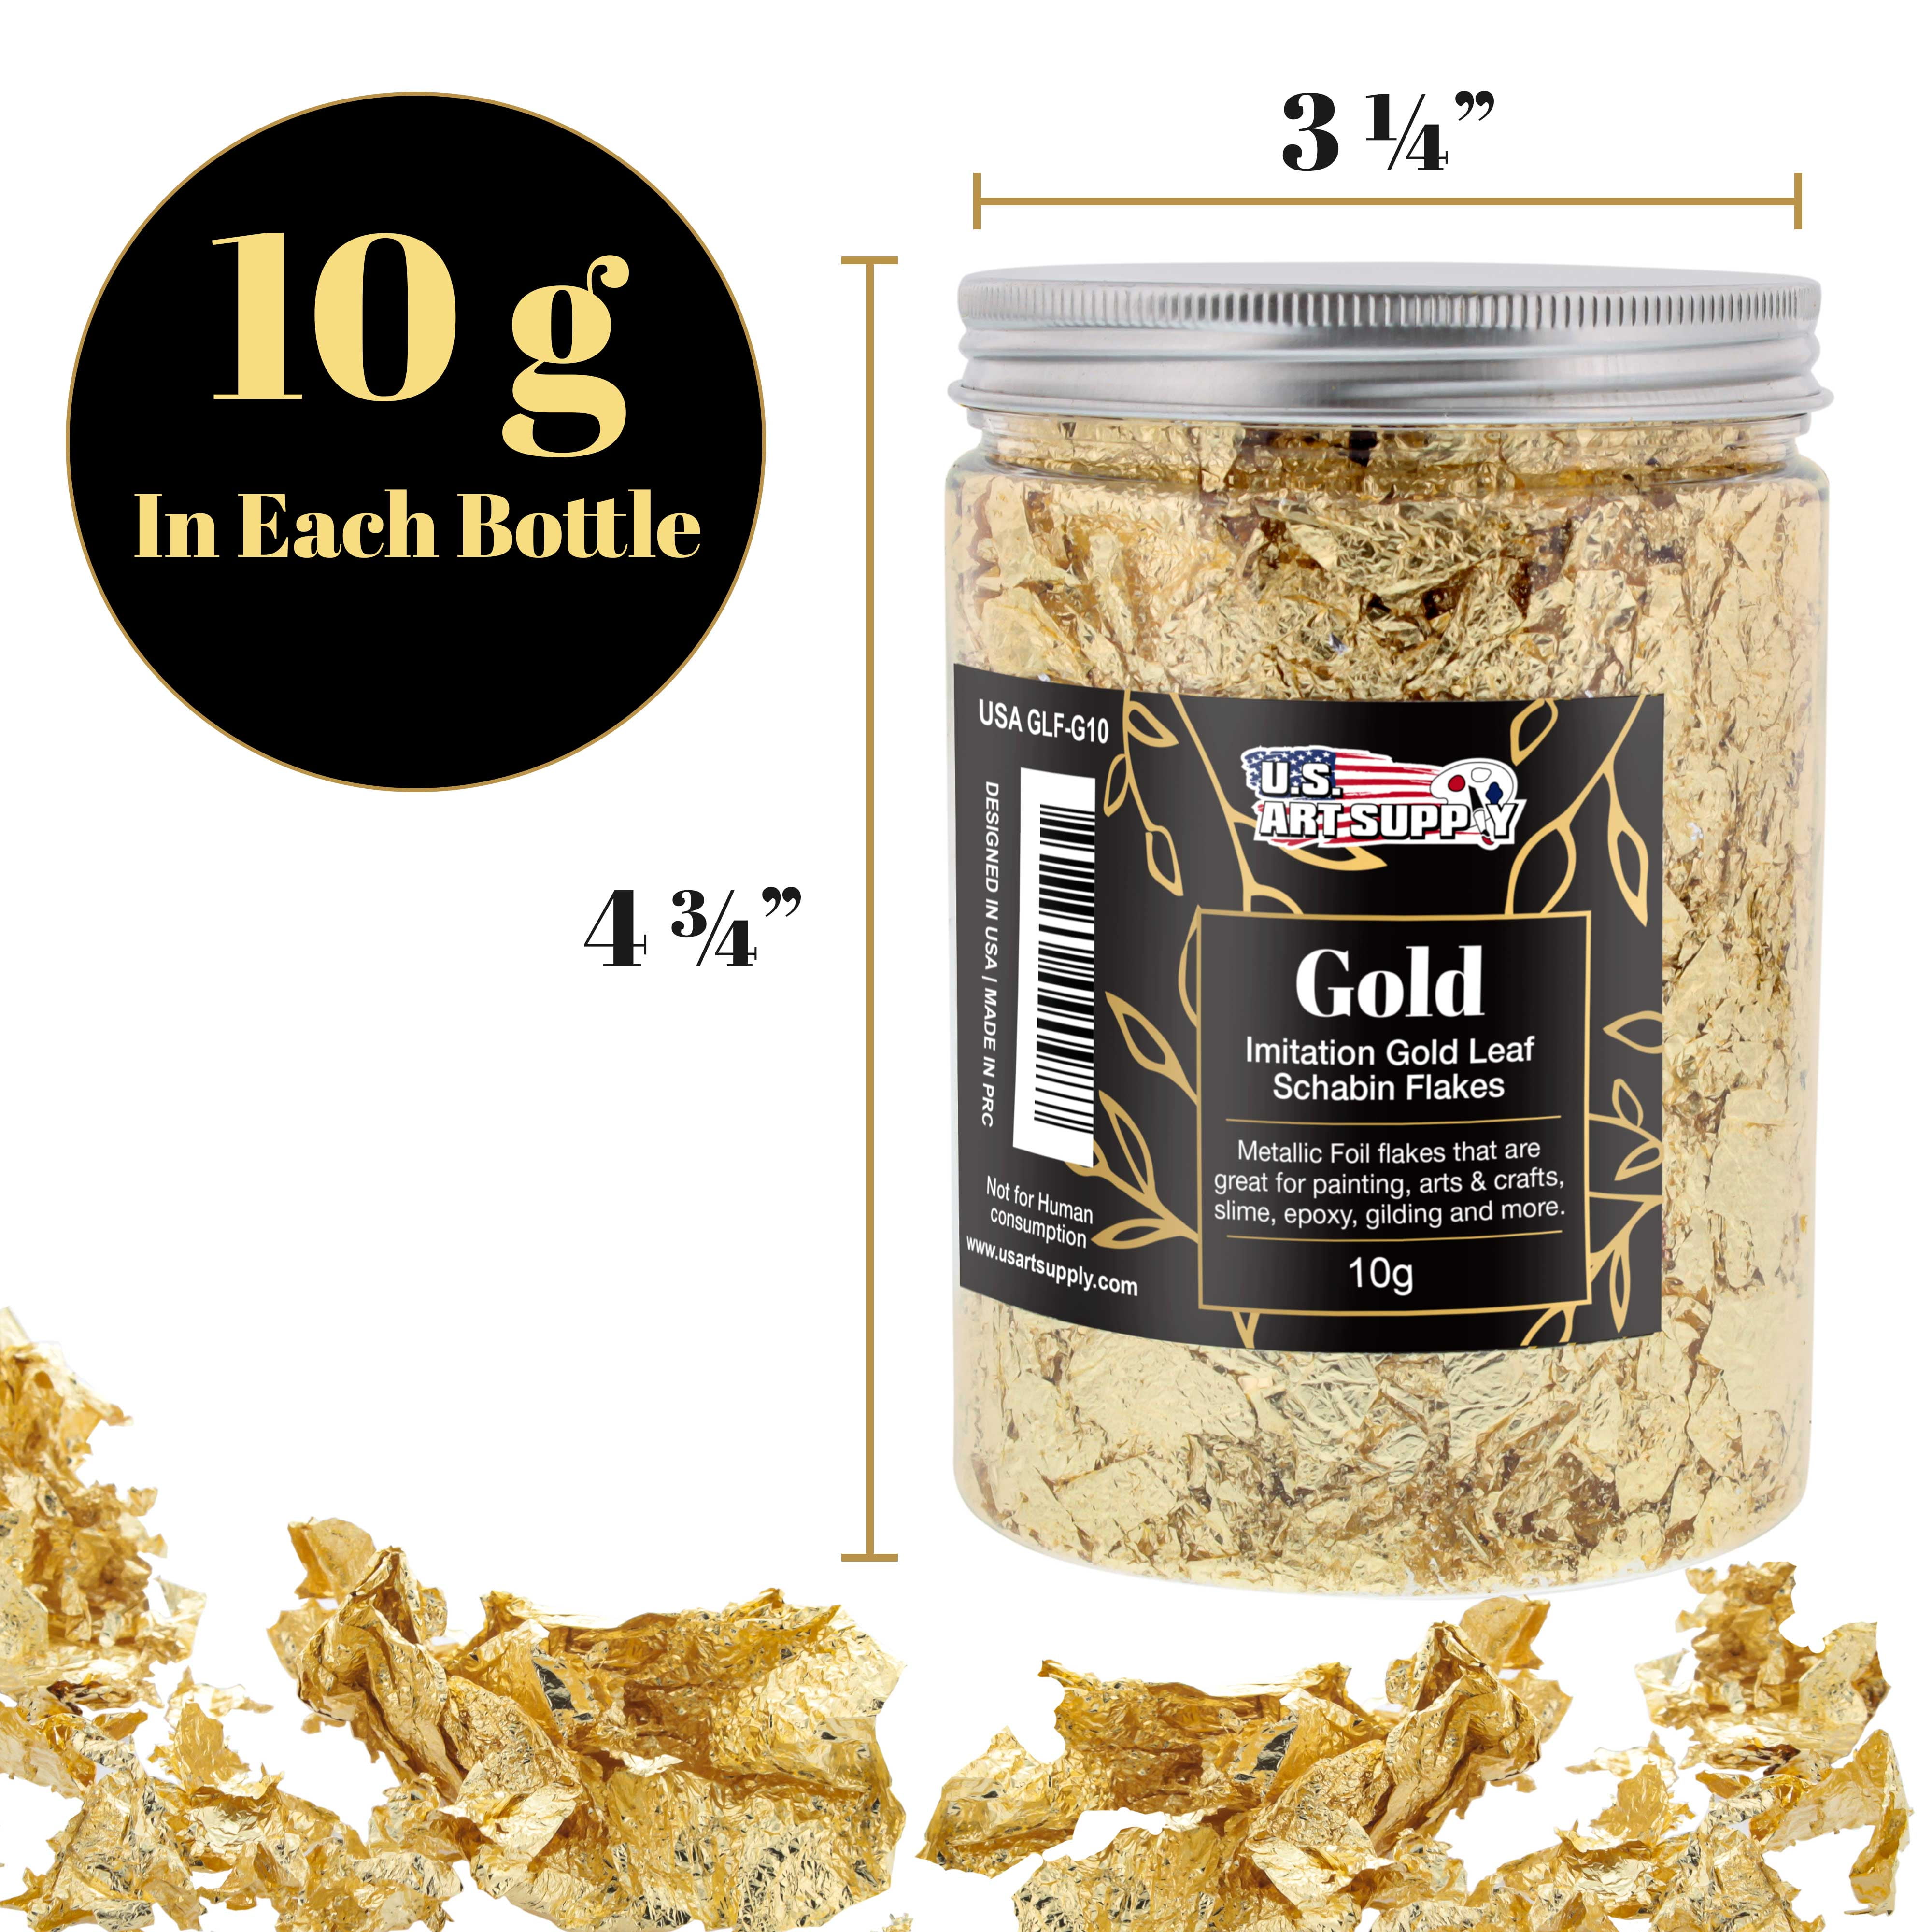 U.S. Art Supply Resin, Paintings, Gold - Jewelry, Leaf Gold Picture Metallic Gram Frames, Decorate - Nails, Foil 10 Gild Gilding Crafts, Arts, Furniture, in Schabin Imitation Slime Flakes Bottle Epoxy